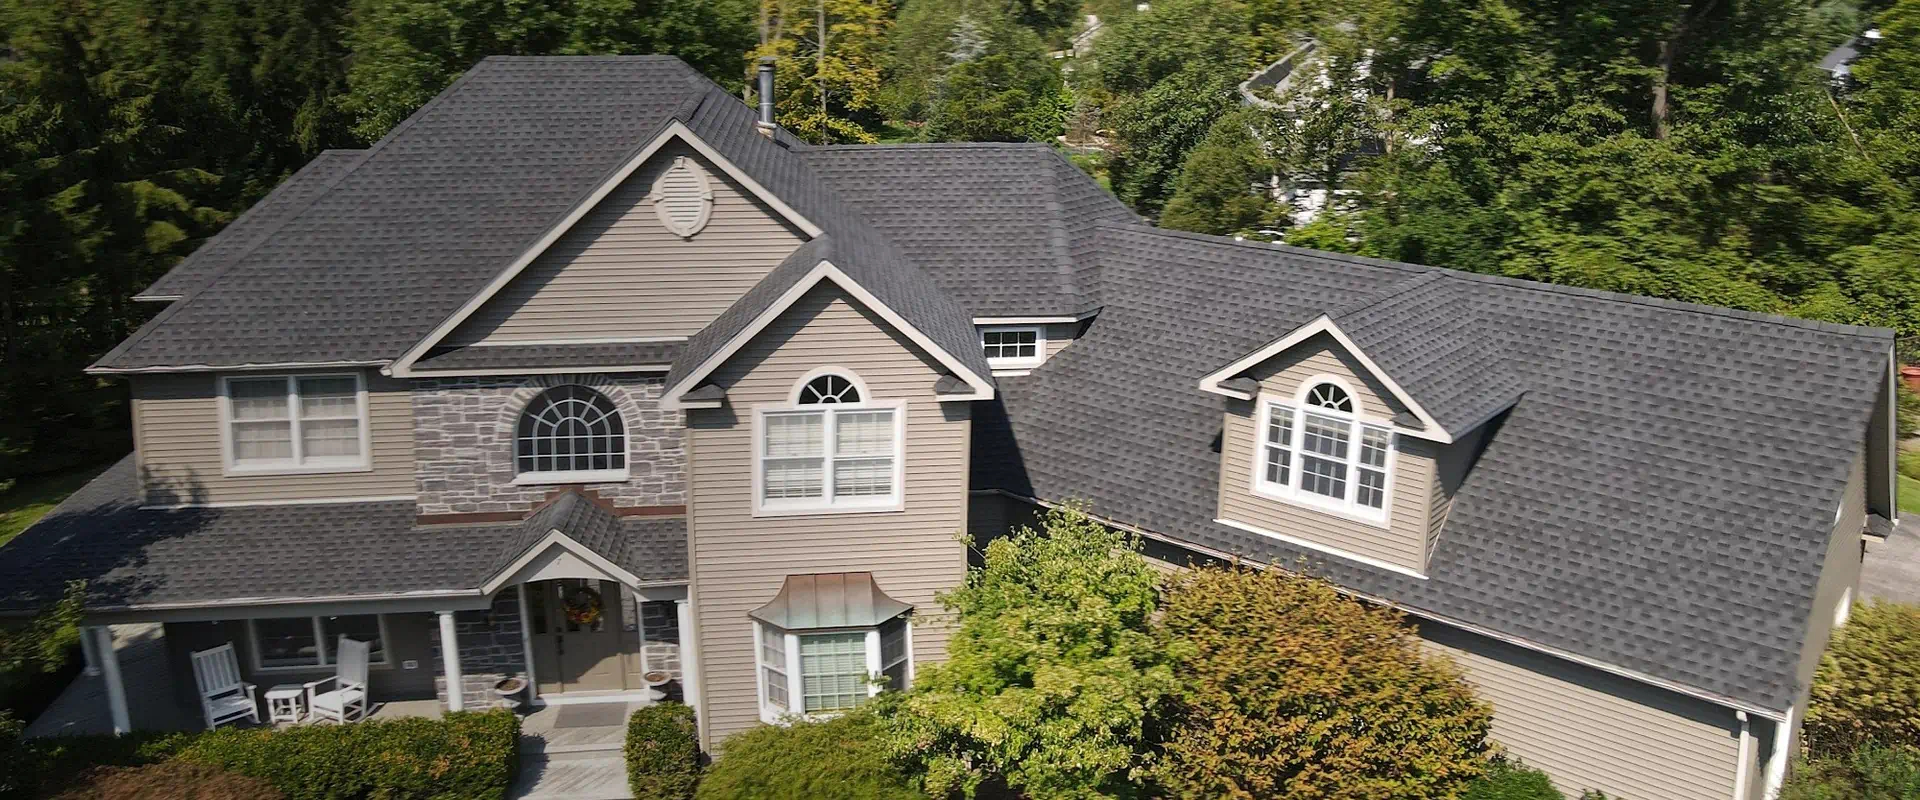 aerial view of a house with an asphalt shingle roof